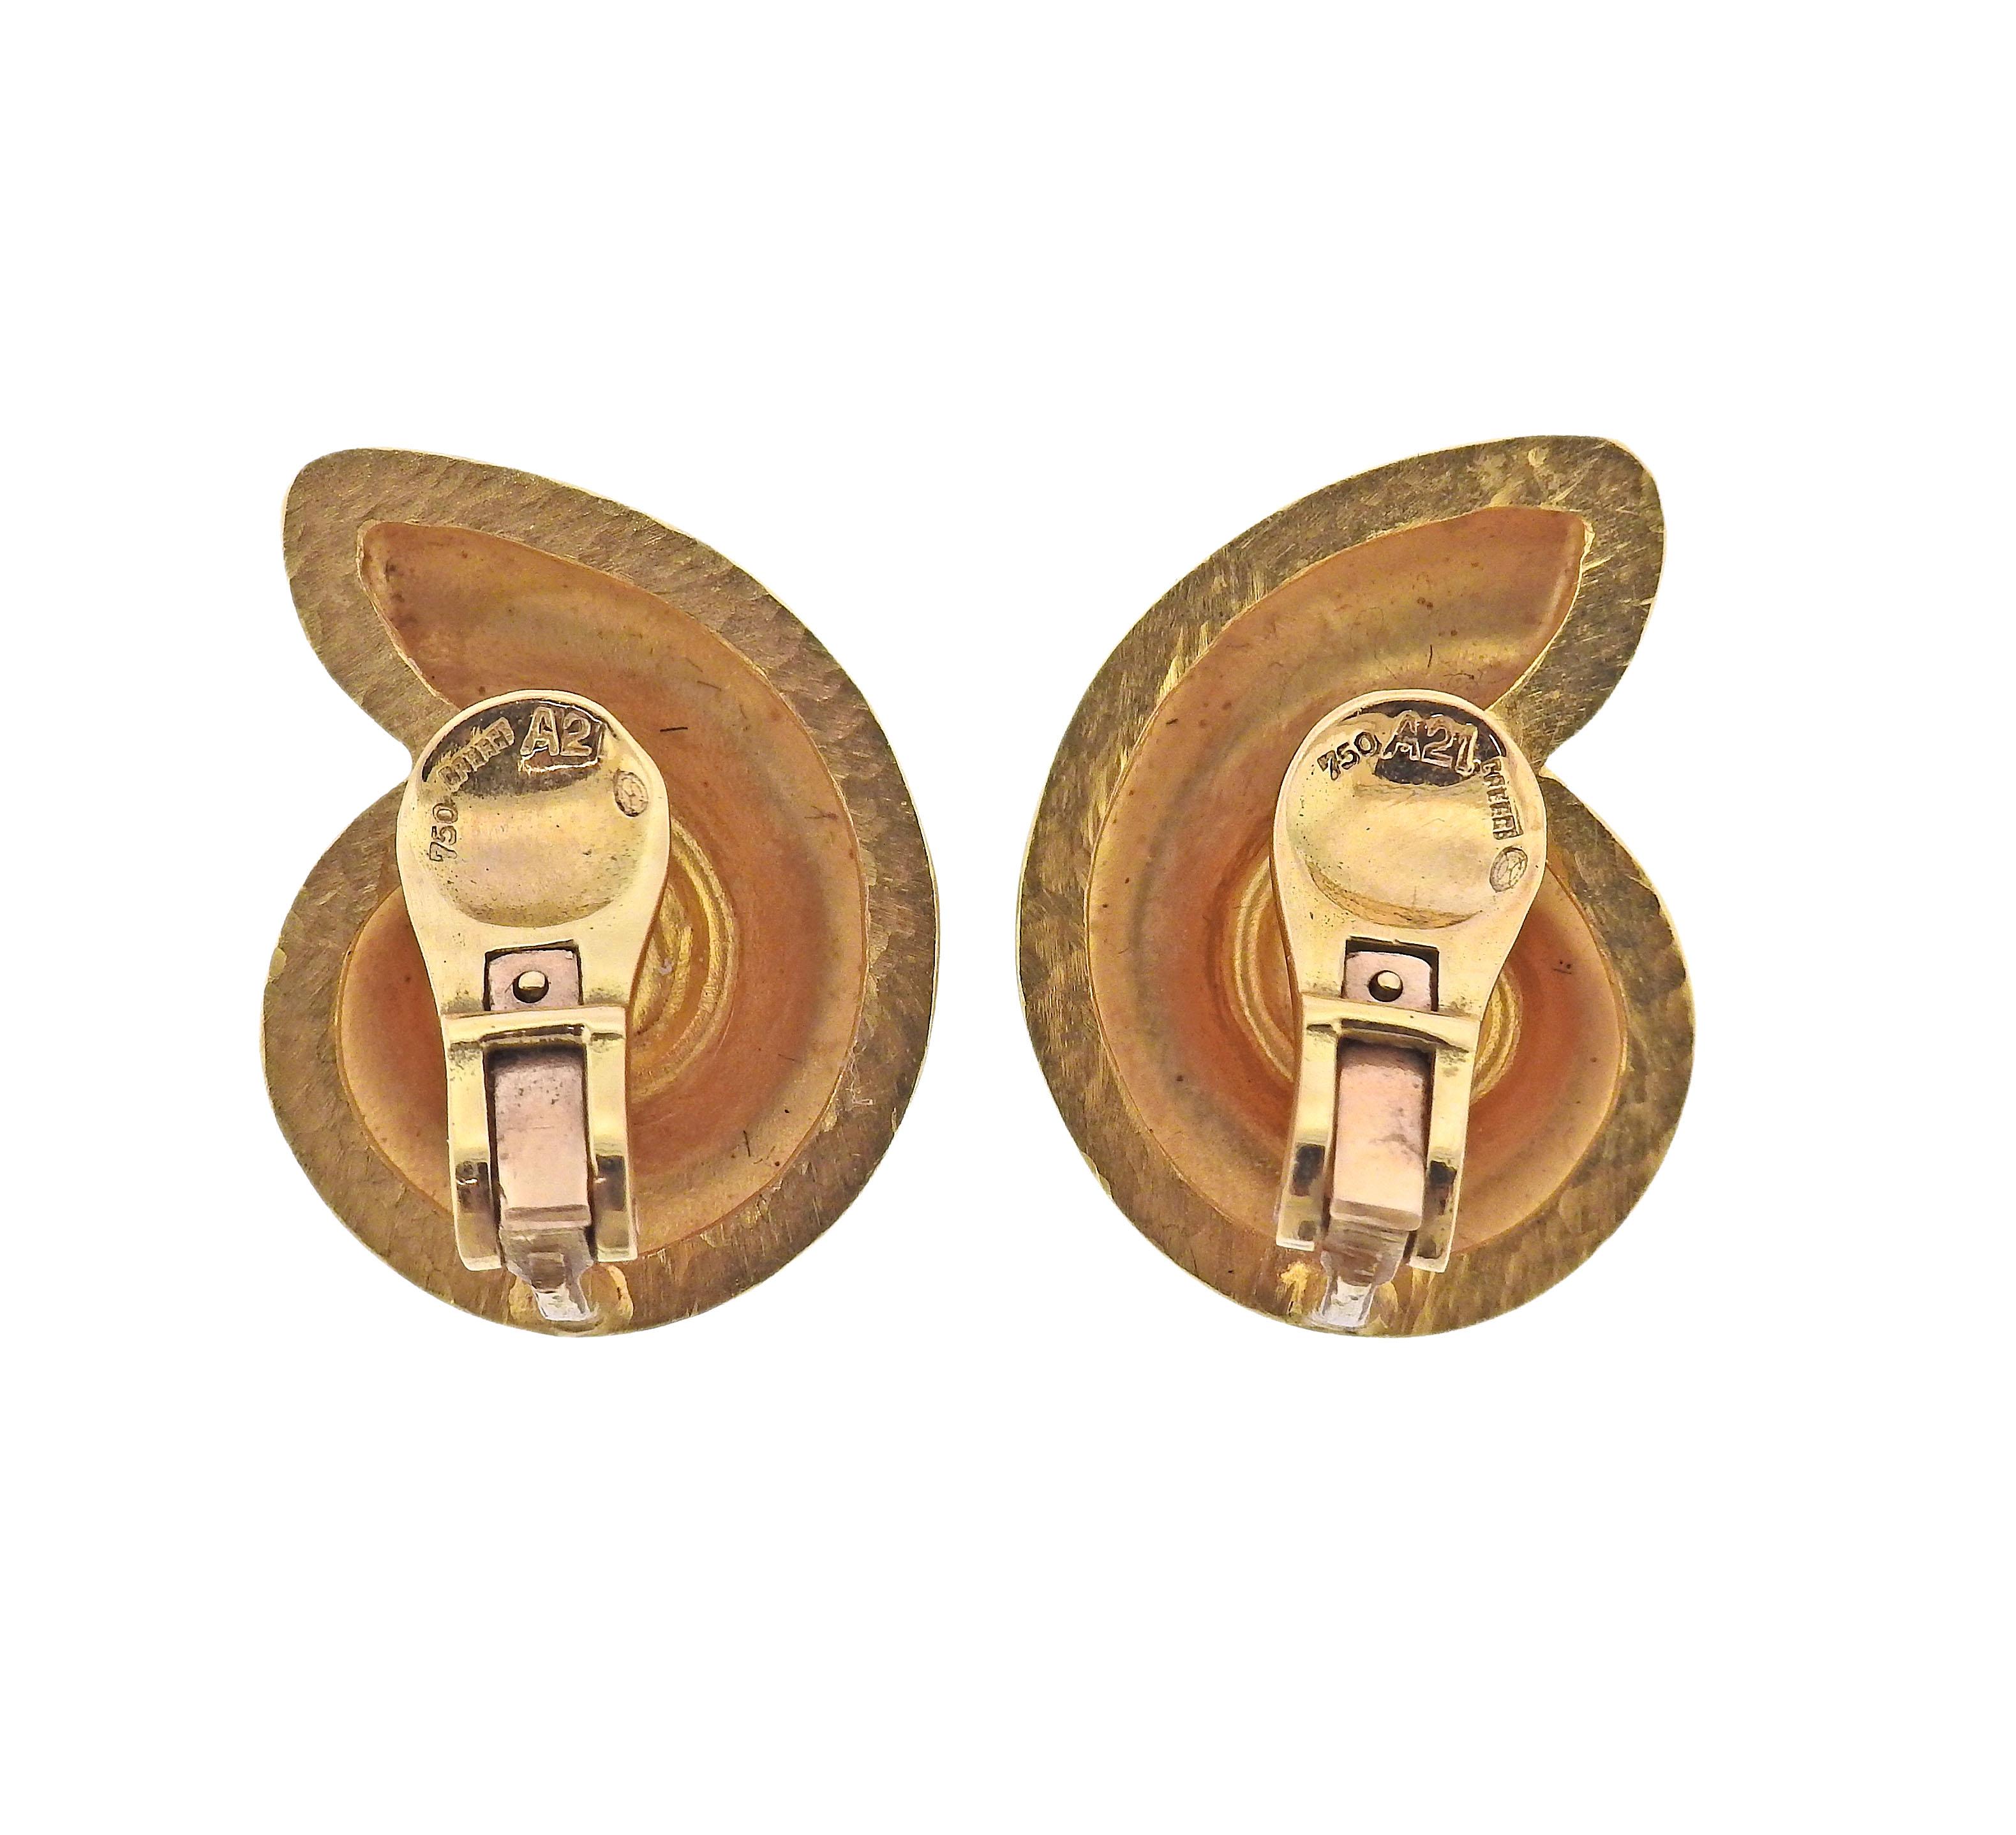 Pair of Ilias Lalounis 18k gold swirl motif earrings. Earrings are 25mm x 20mm. Marked:  A21, 750, Lalaounis mark. Weight 12 grams.